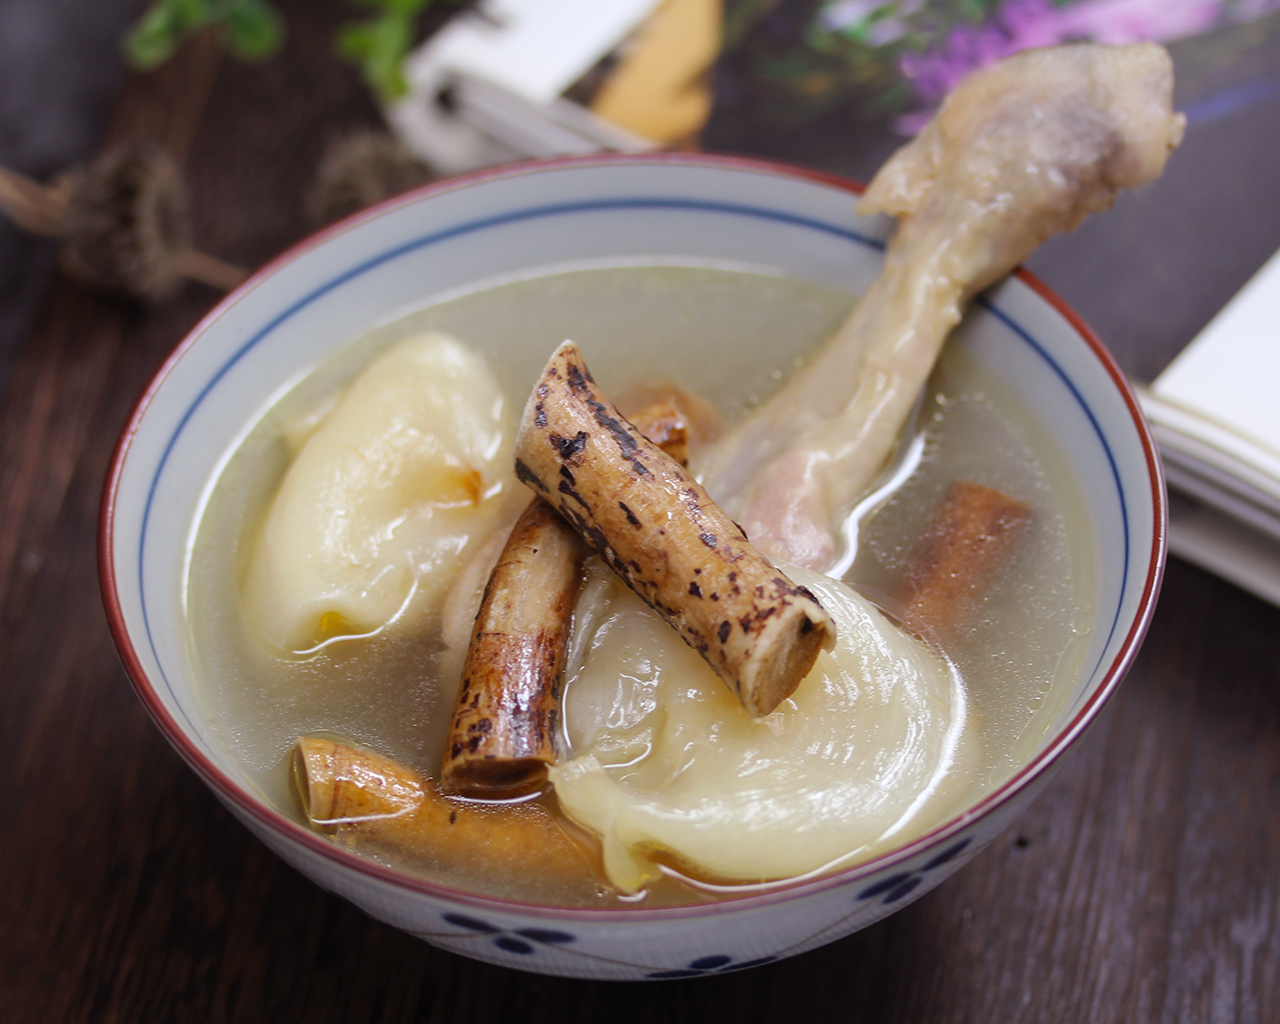 
Wild peach of the five fingers spends glue soup | Be good at lienal the way that raises a stomach